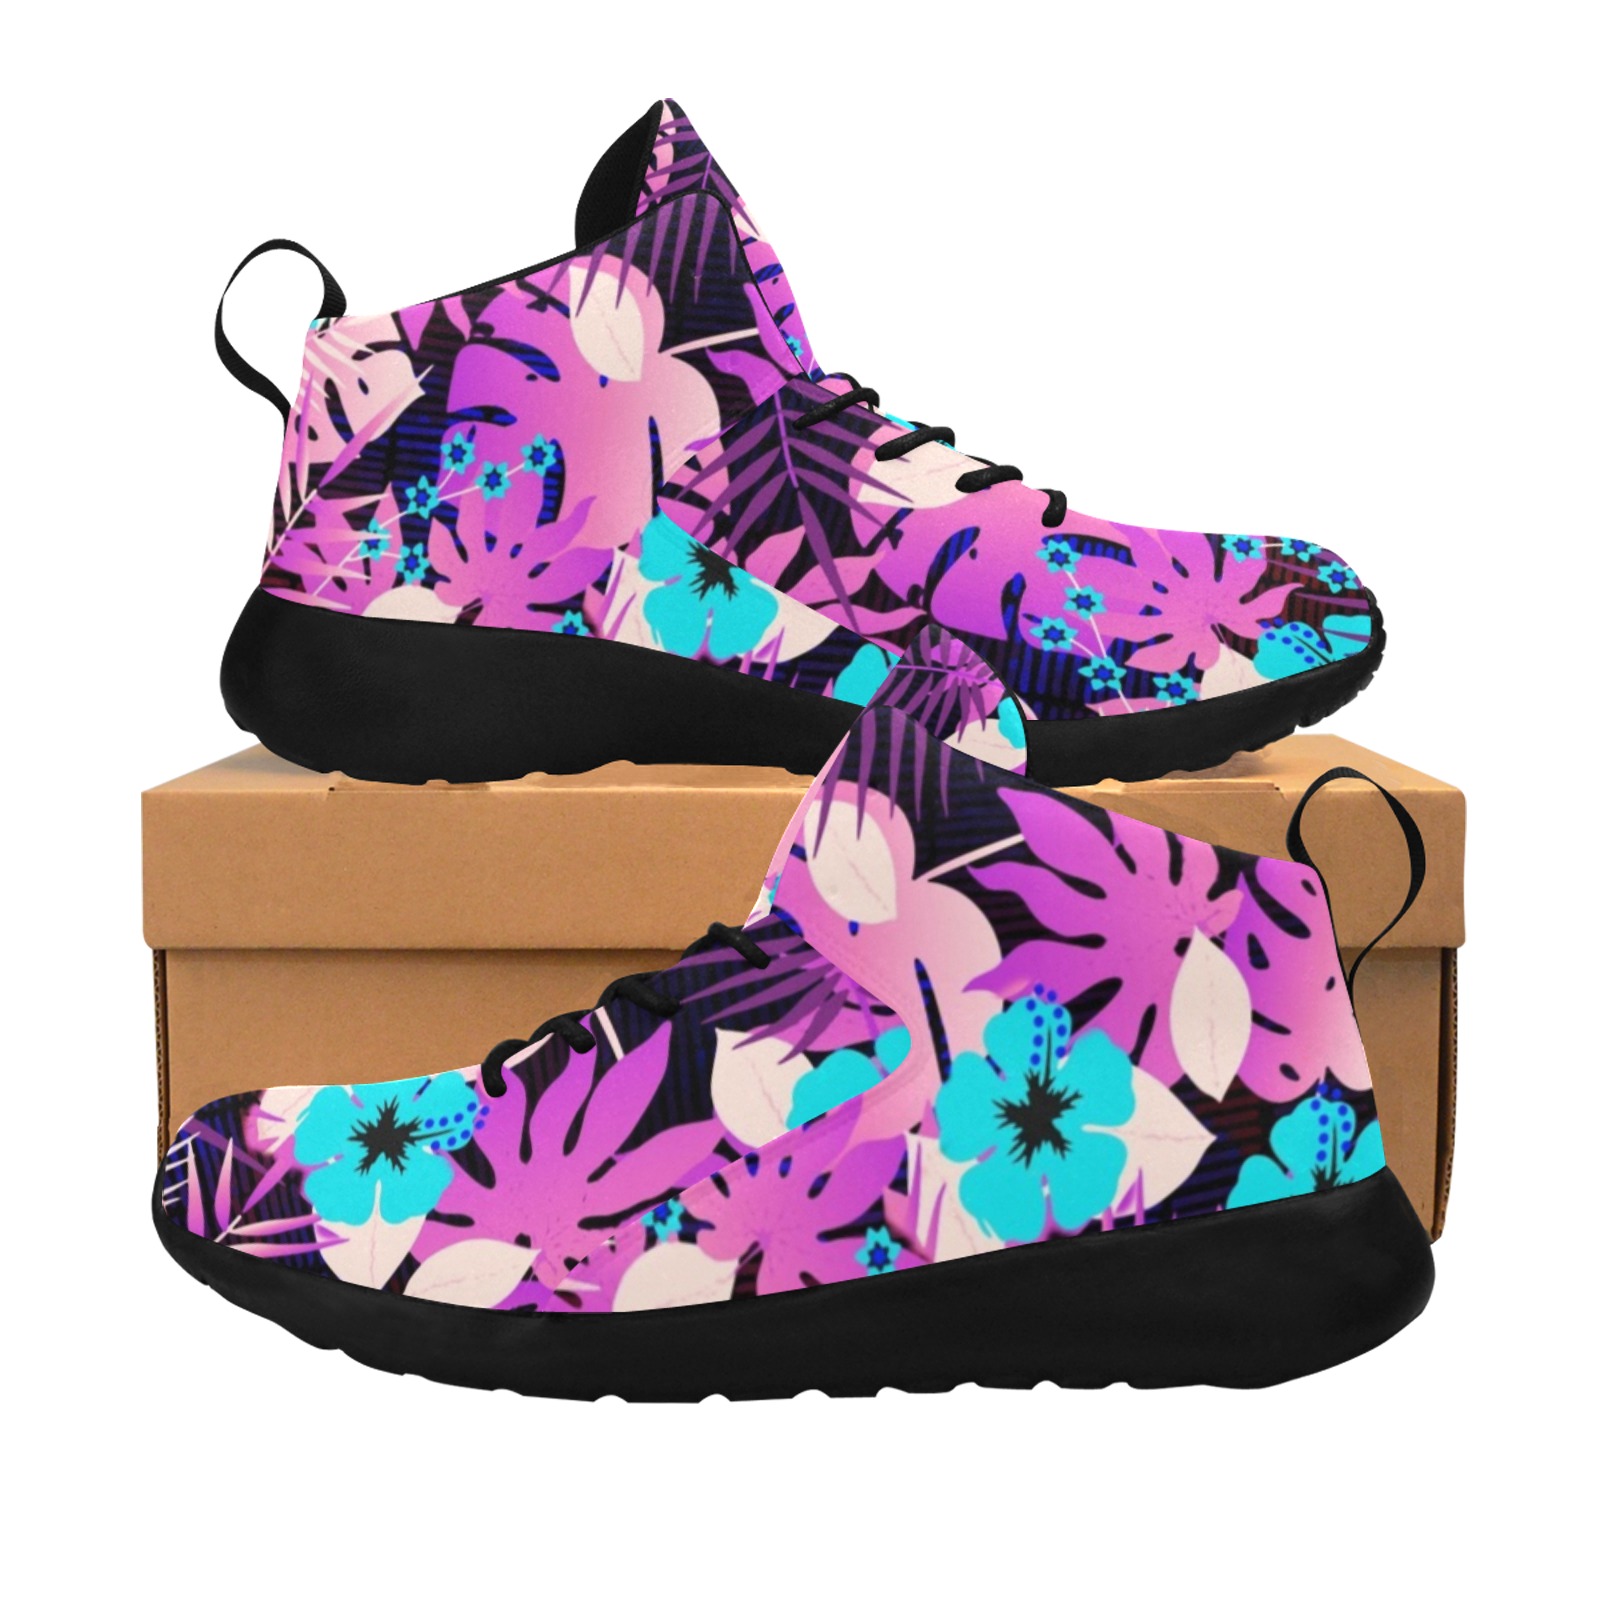 GROOVY FUNK THING FLORAL PURPLE Men's Chukka Training Shoes (Model 57502)